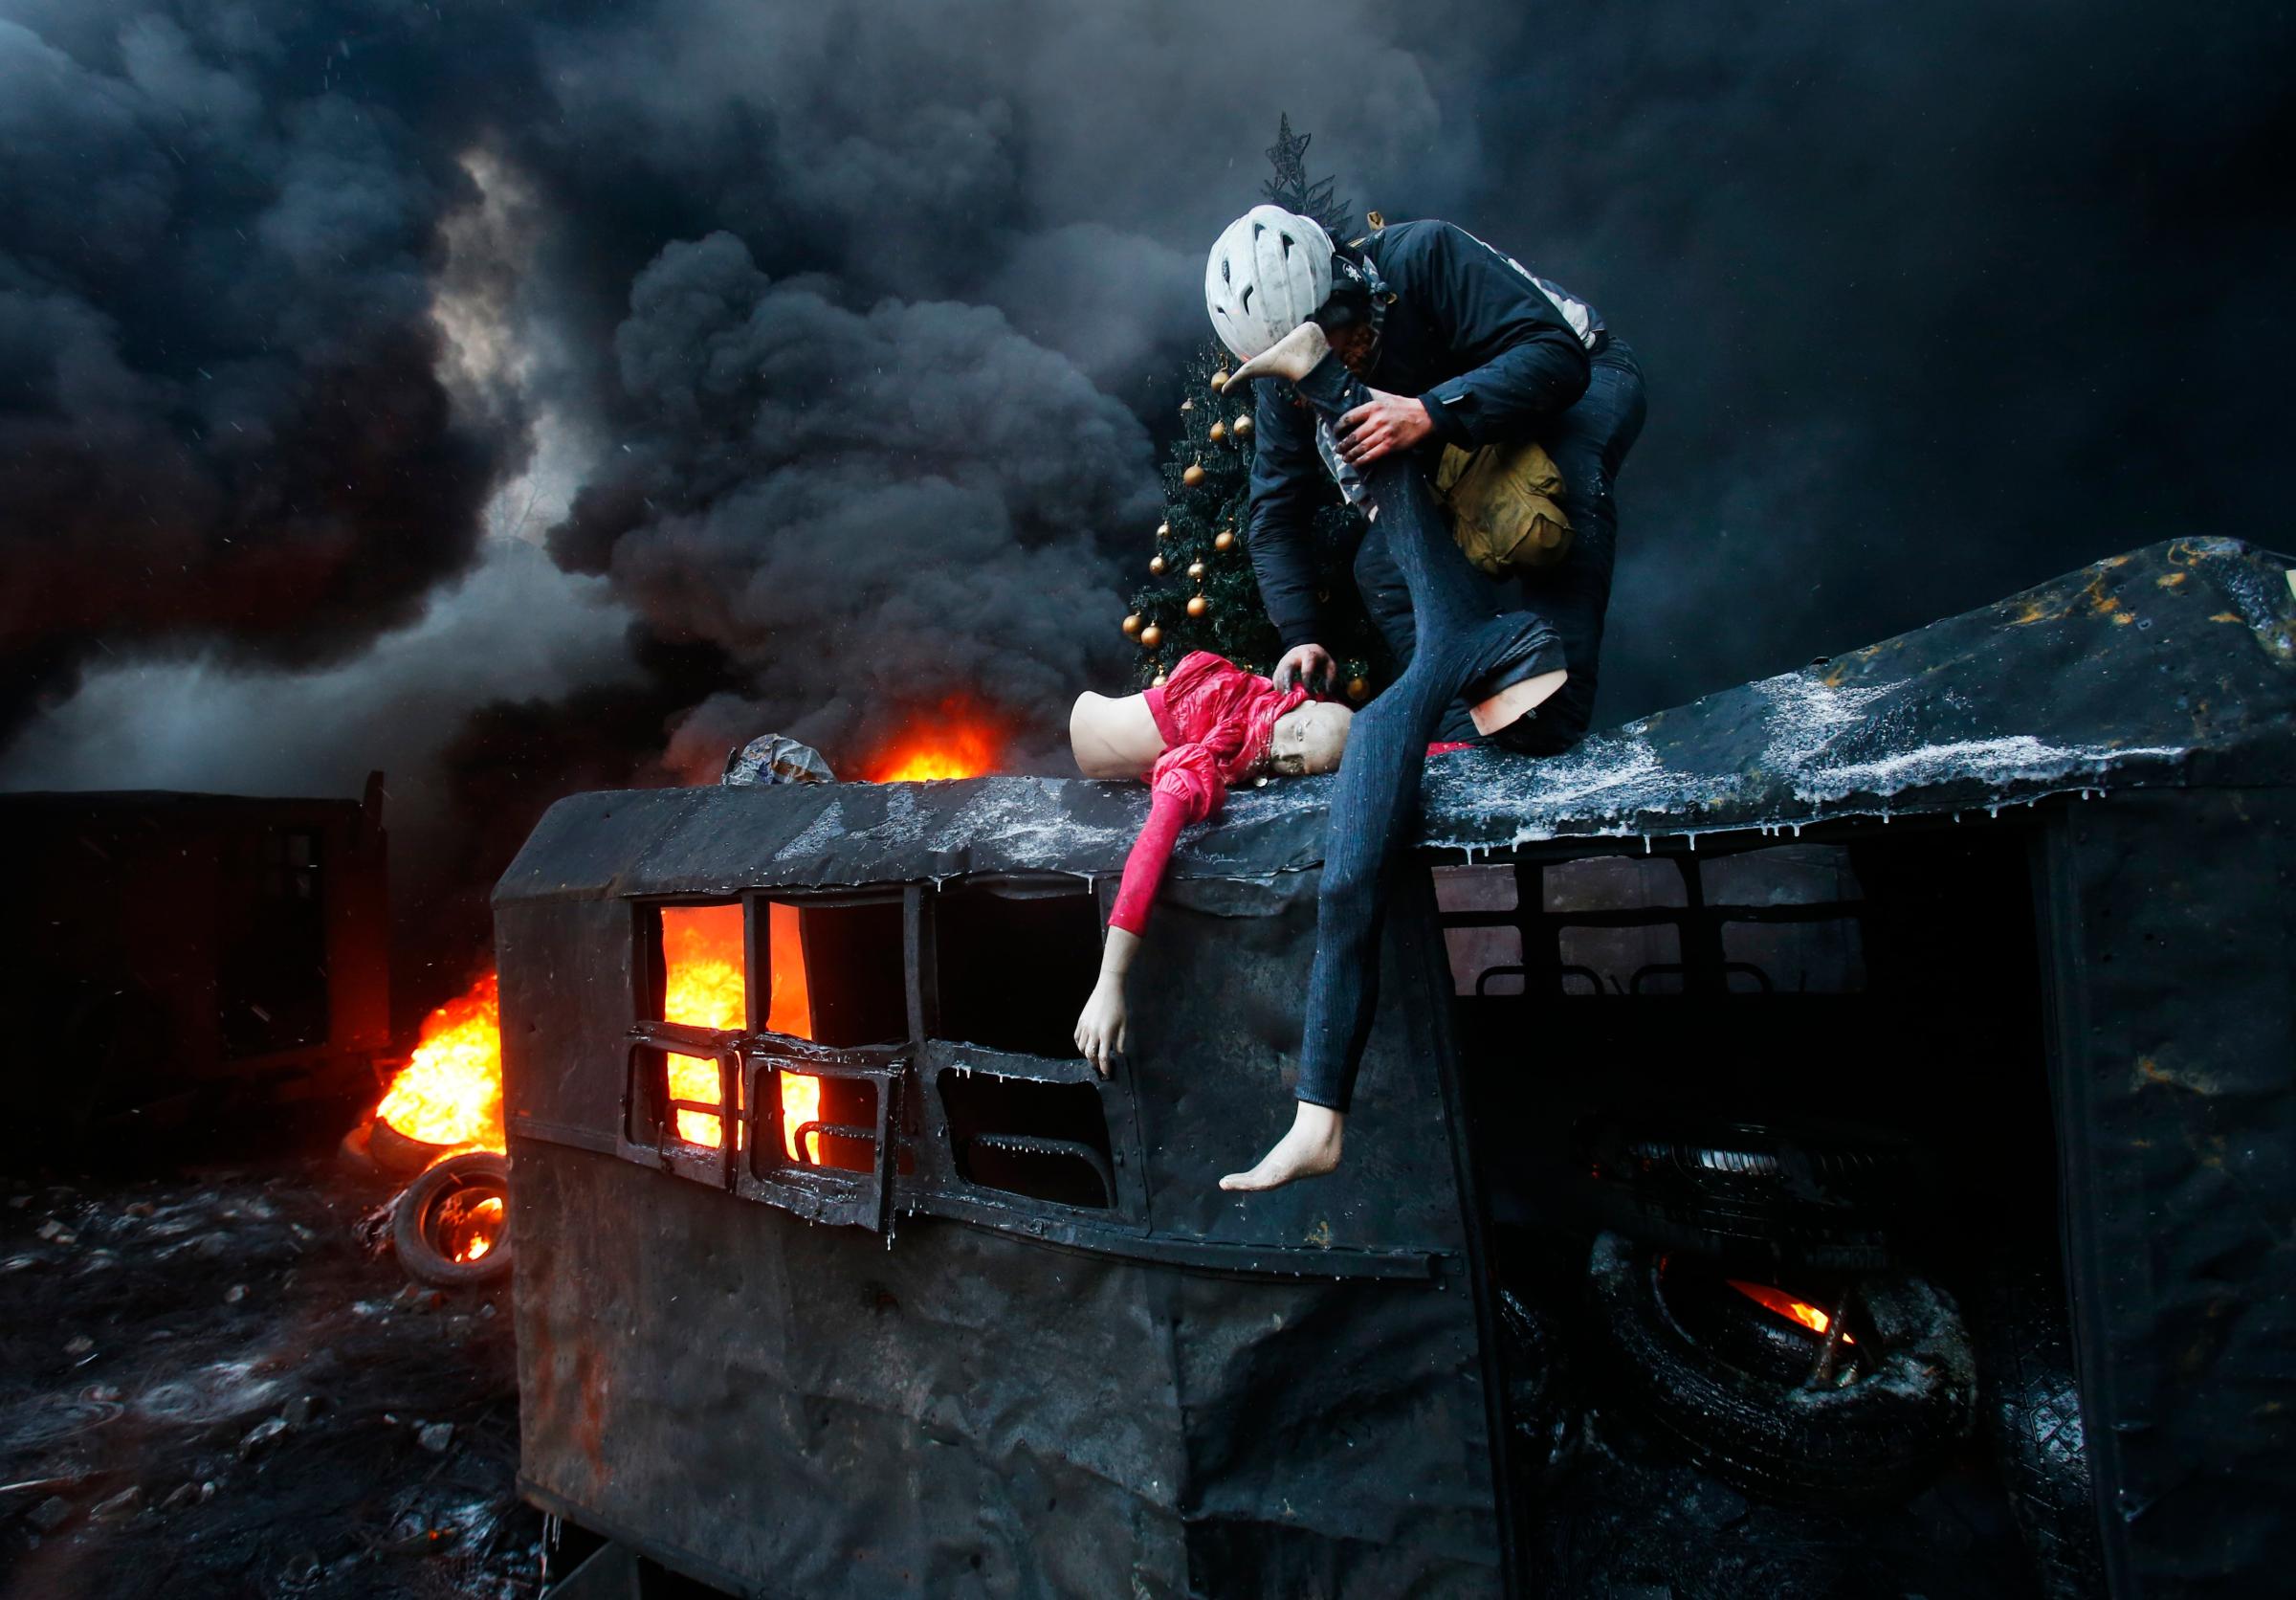 A protester breaks up a mannequin on the roof of the burned truck during clashes with police in central Kiev, Ukraine, Thursday Jan. 23, 2014.